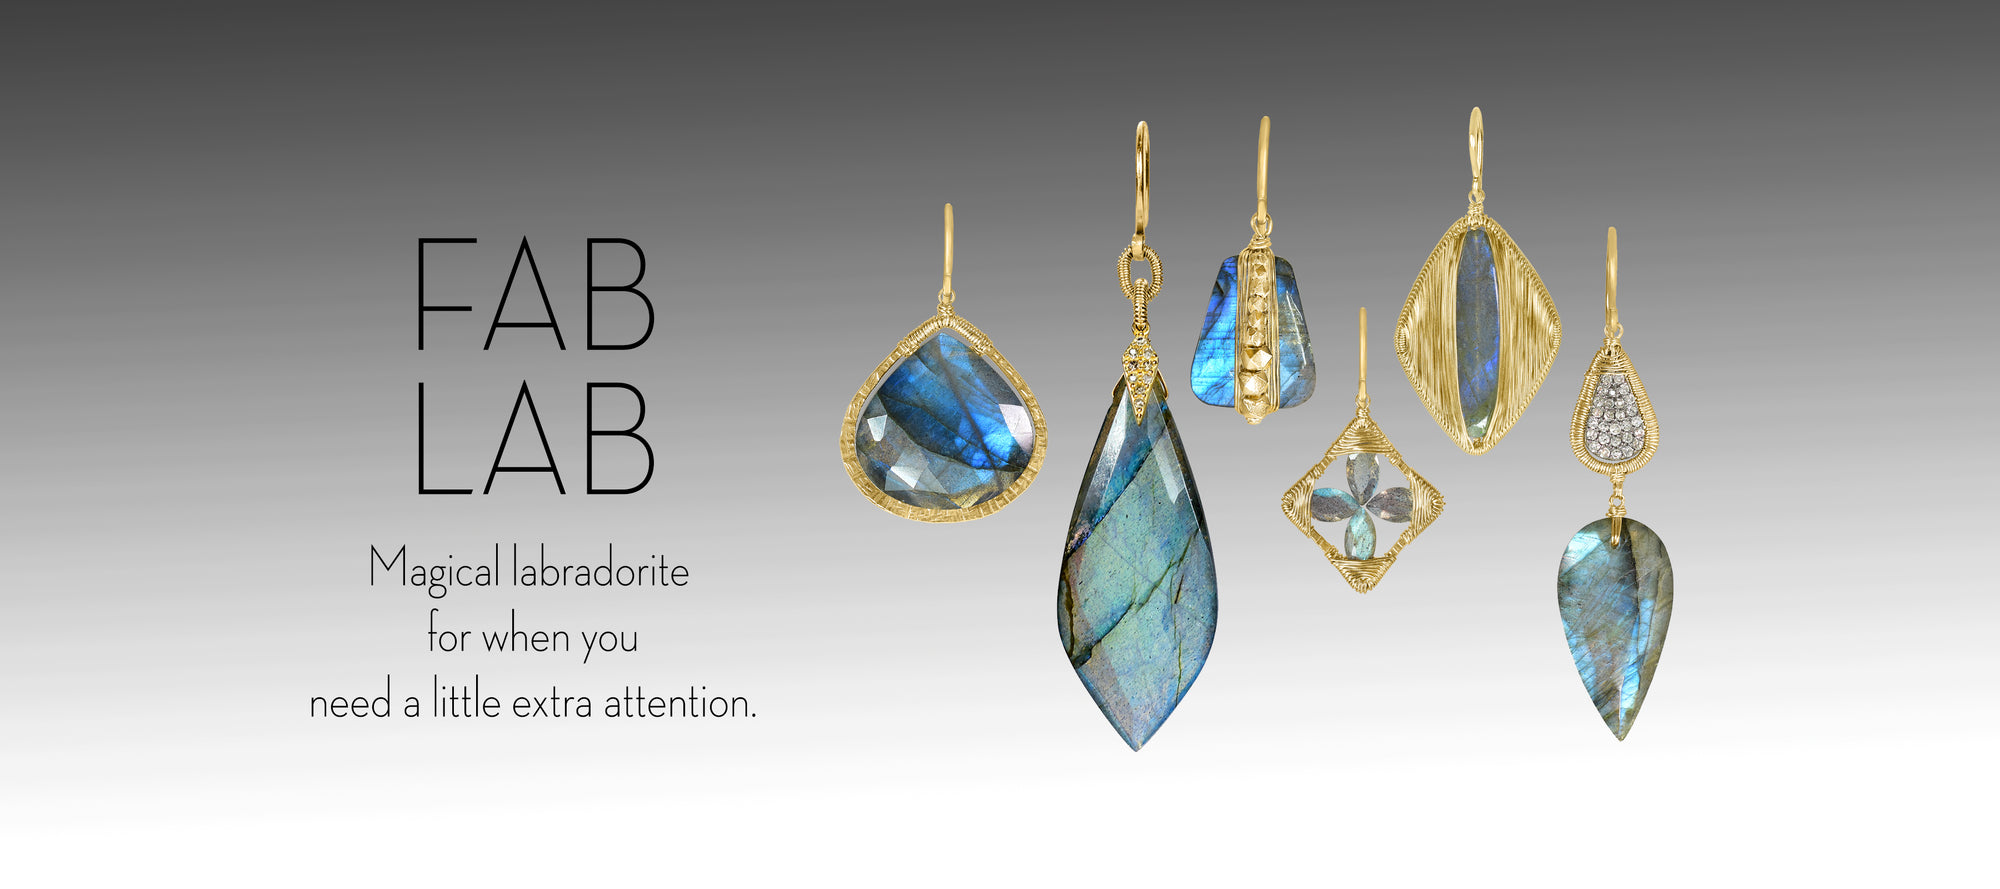 Fab Lab. Magical Labradorite for when you need a little extra attention.